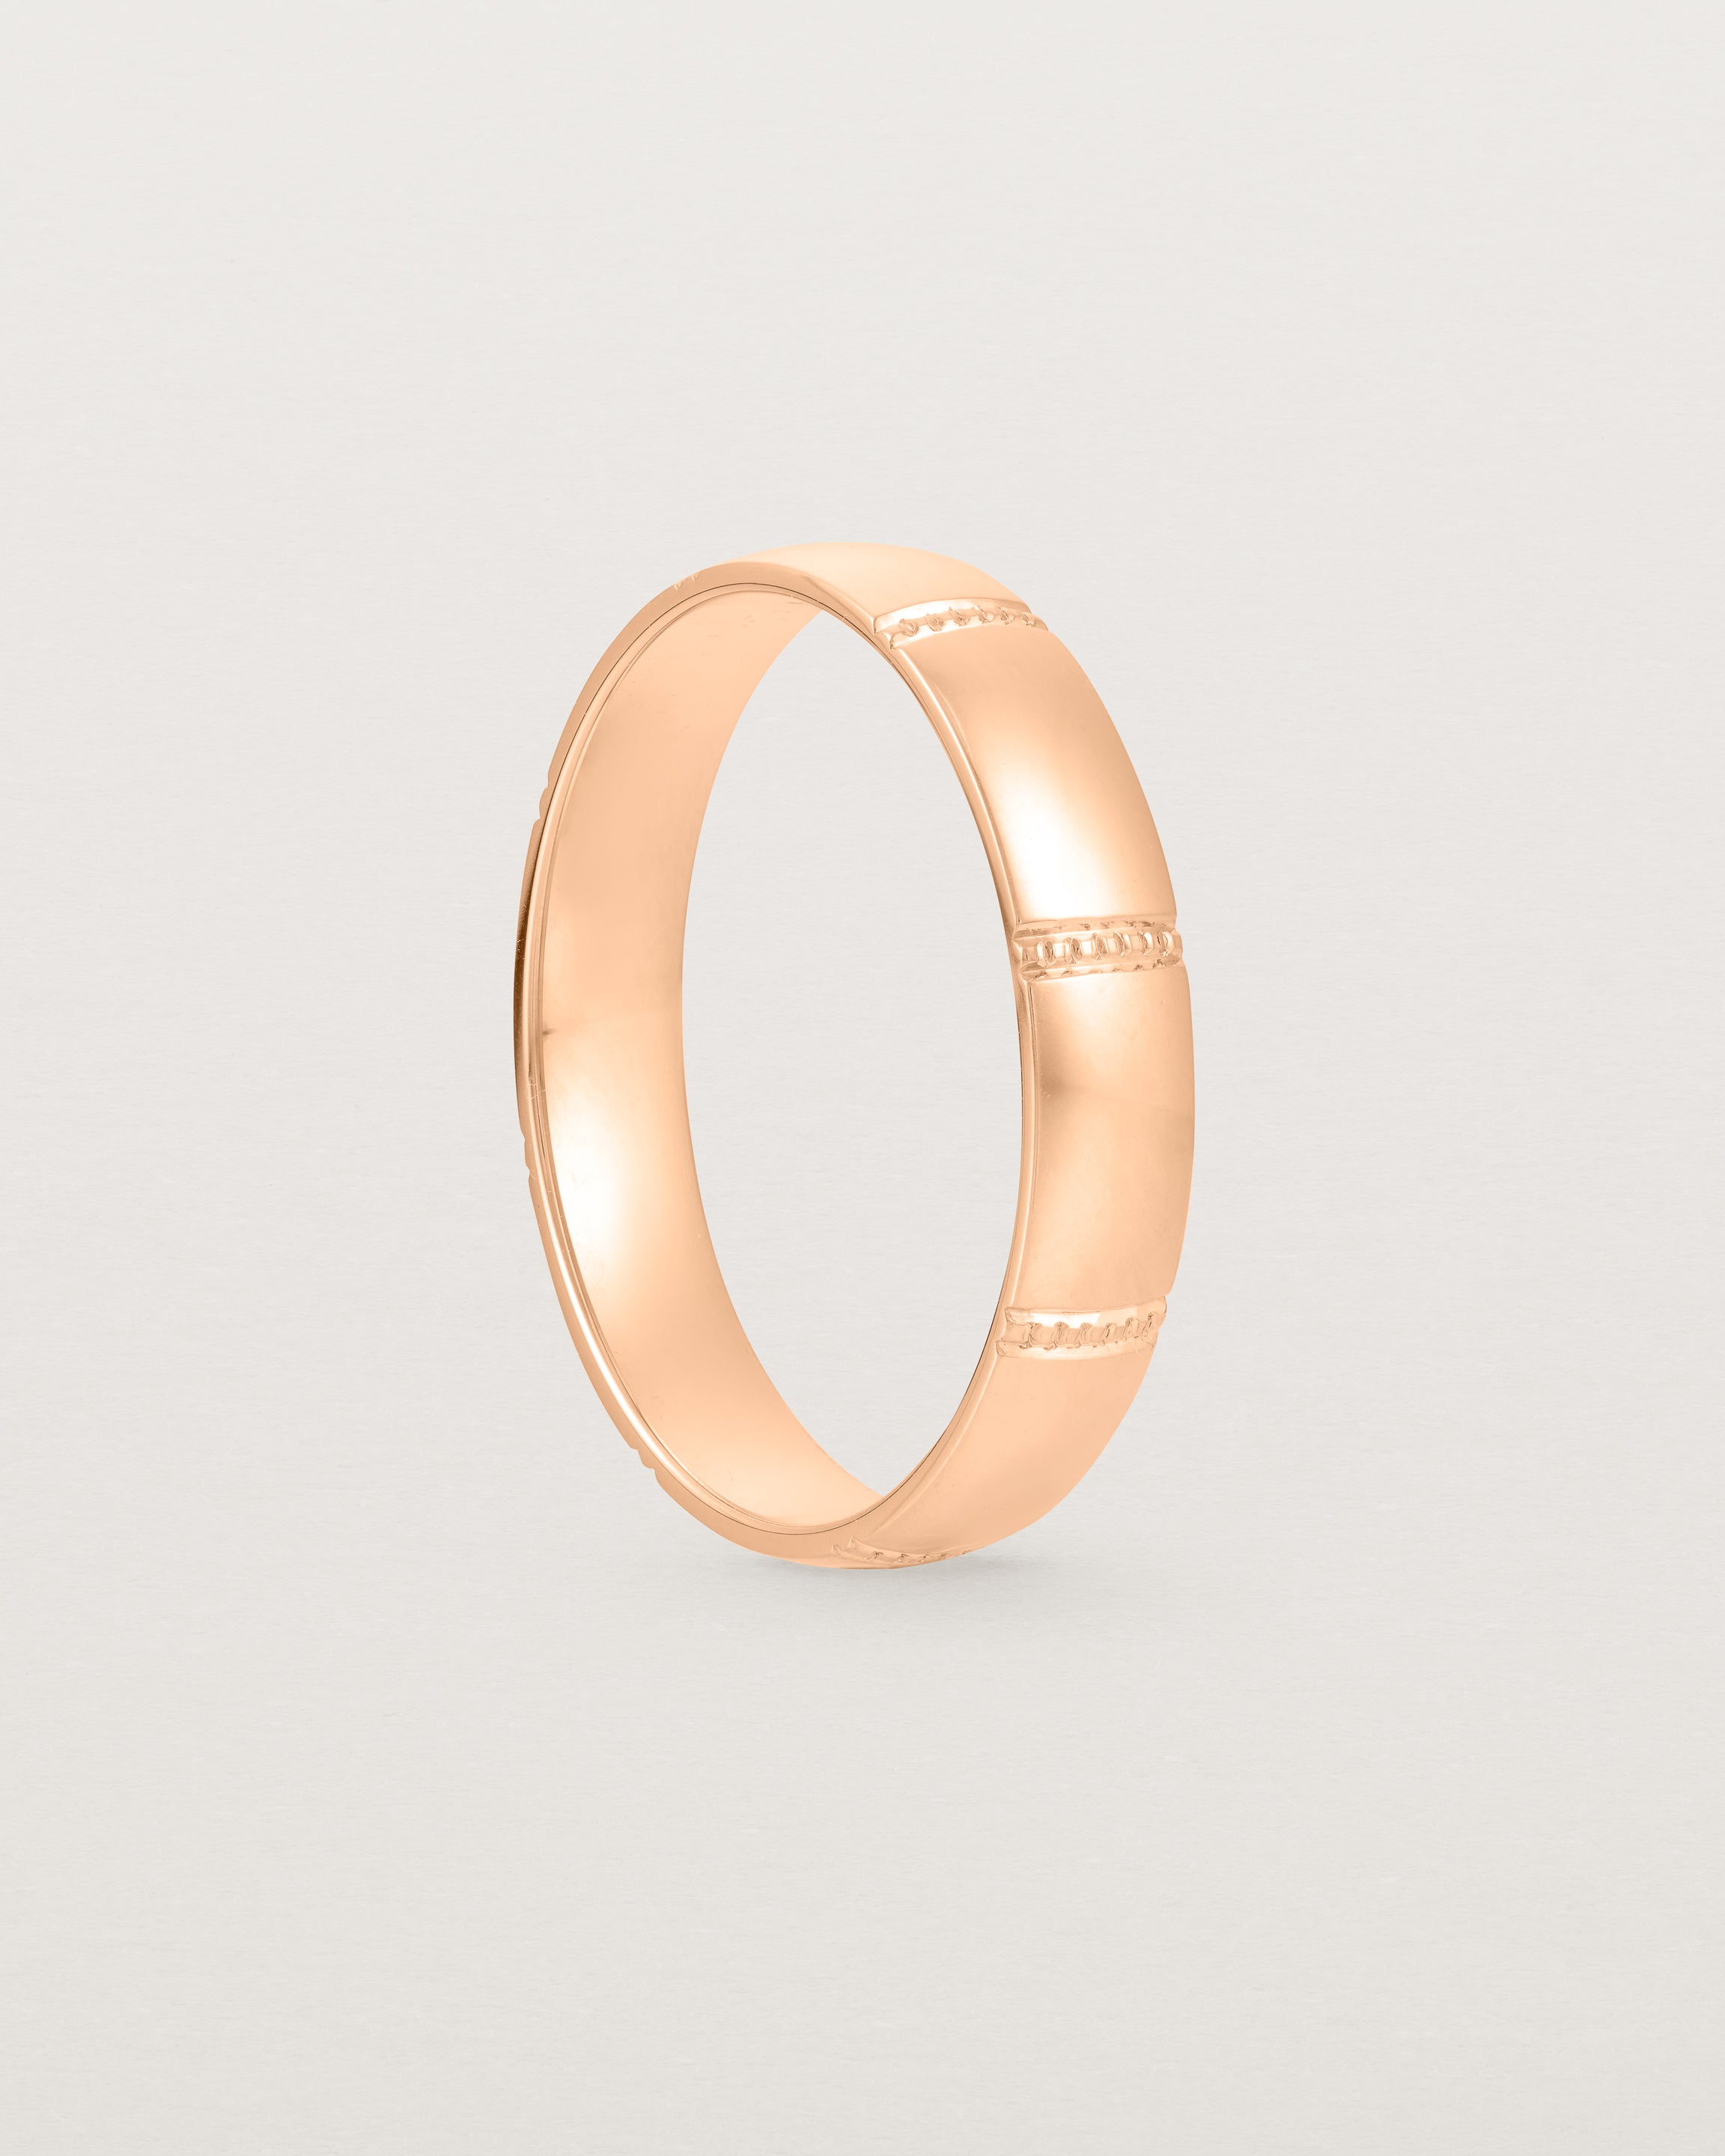 Standing view of the Grain Wedding Ring | 4mm | Rose Gold.